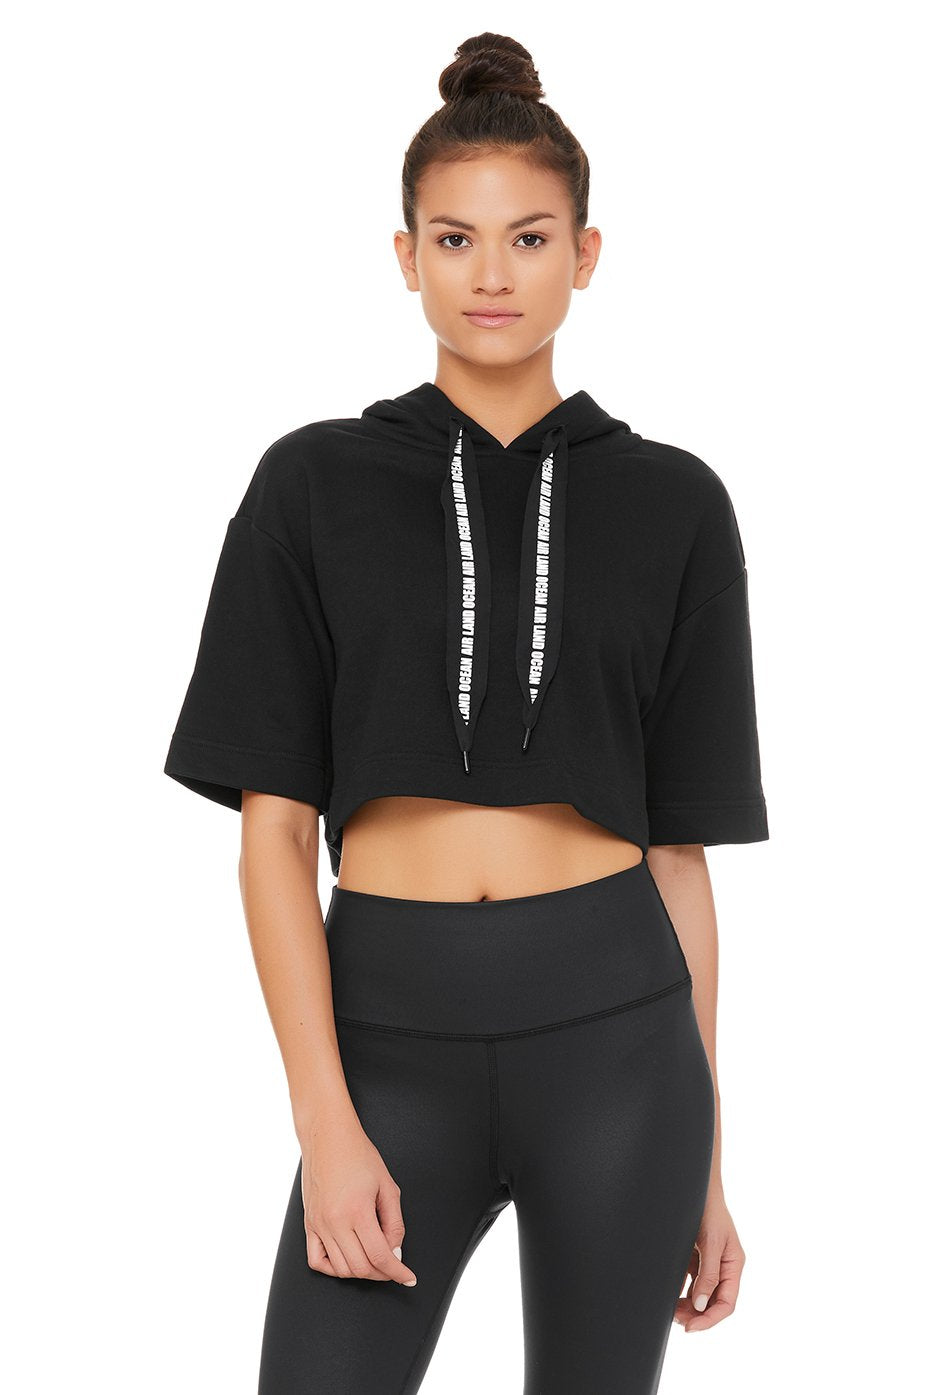 Lowered Price NWT Alo Yoga Black Realm Short Sleeve Hoodie S $119 *Sold  Out!*